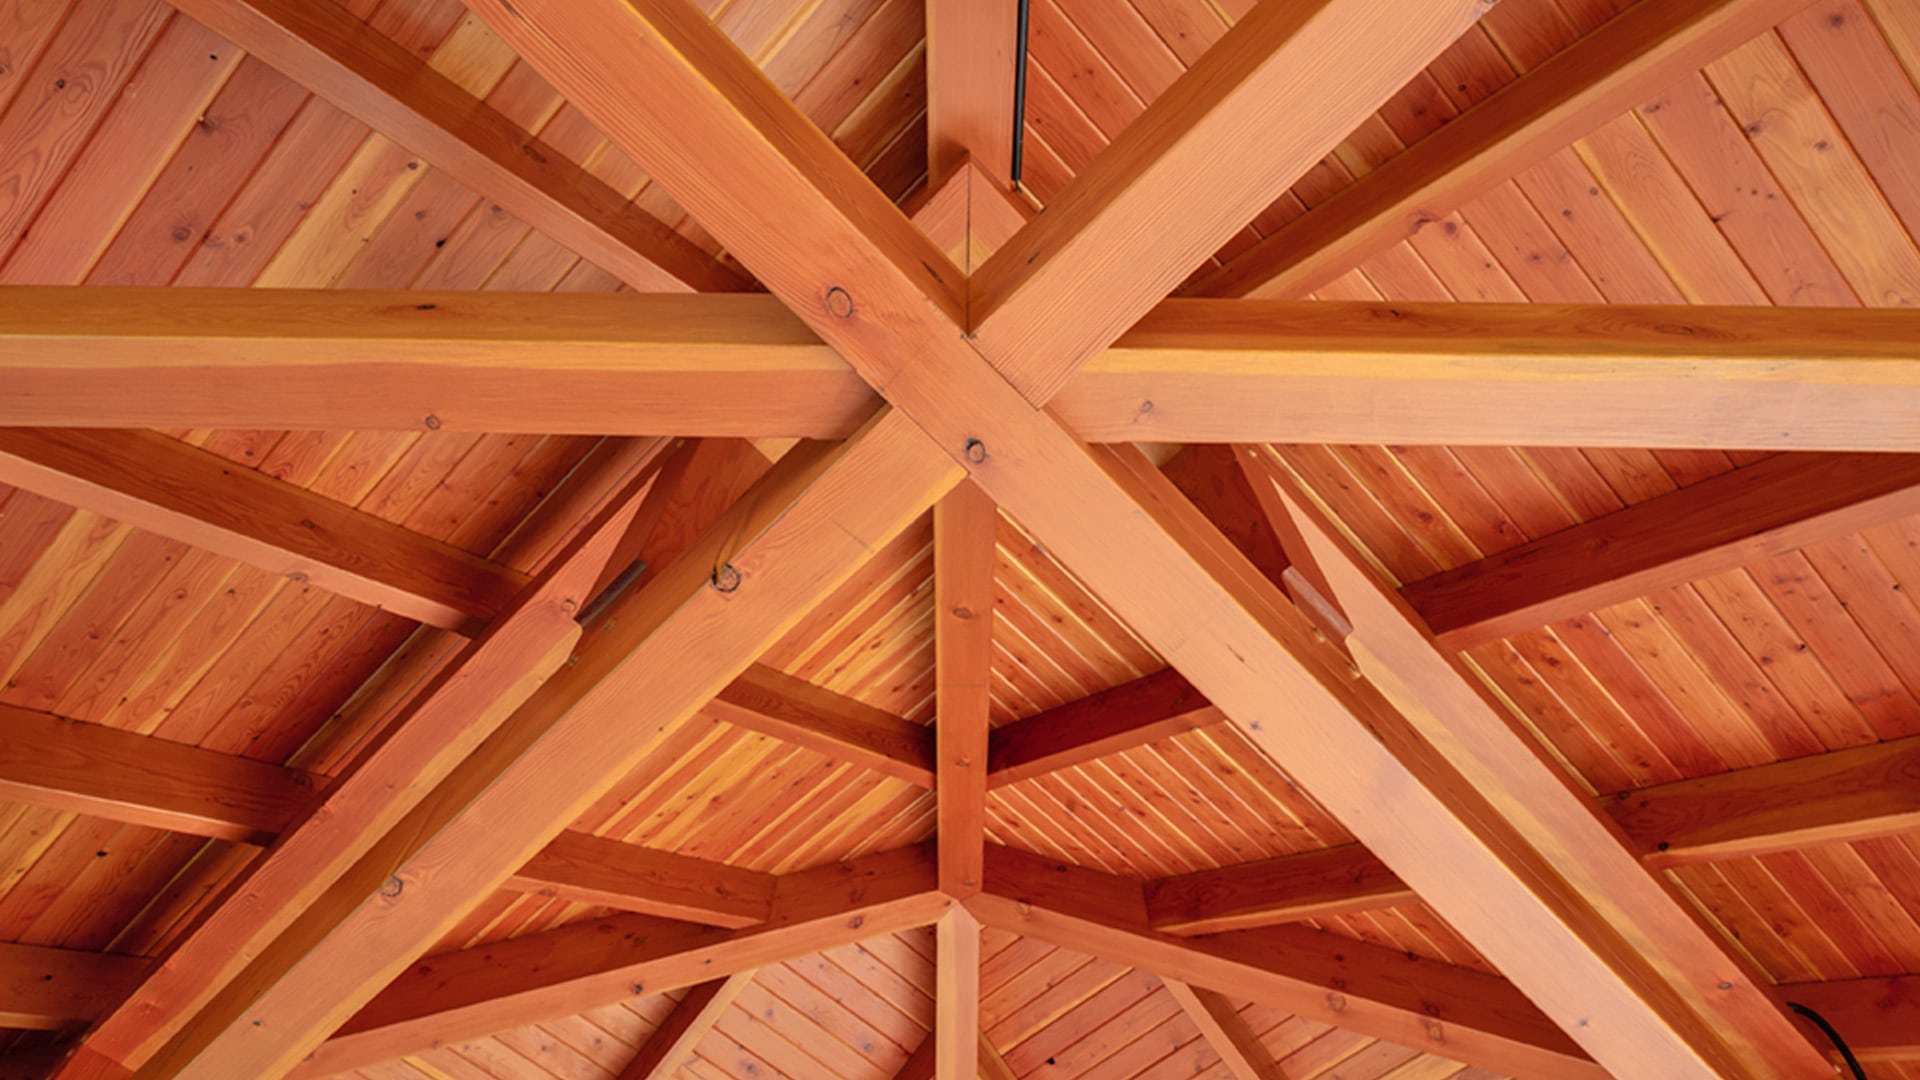 Dharmakaya Center for Wellbeing Pavilion (timber frame close-up view)